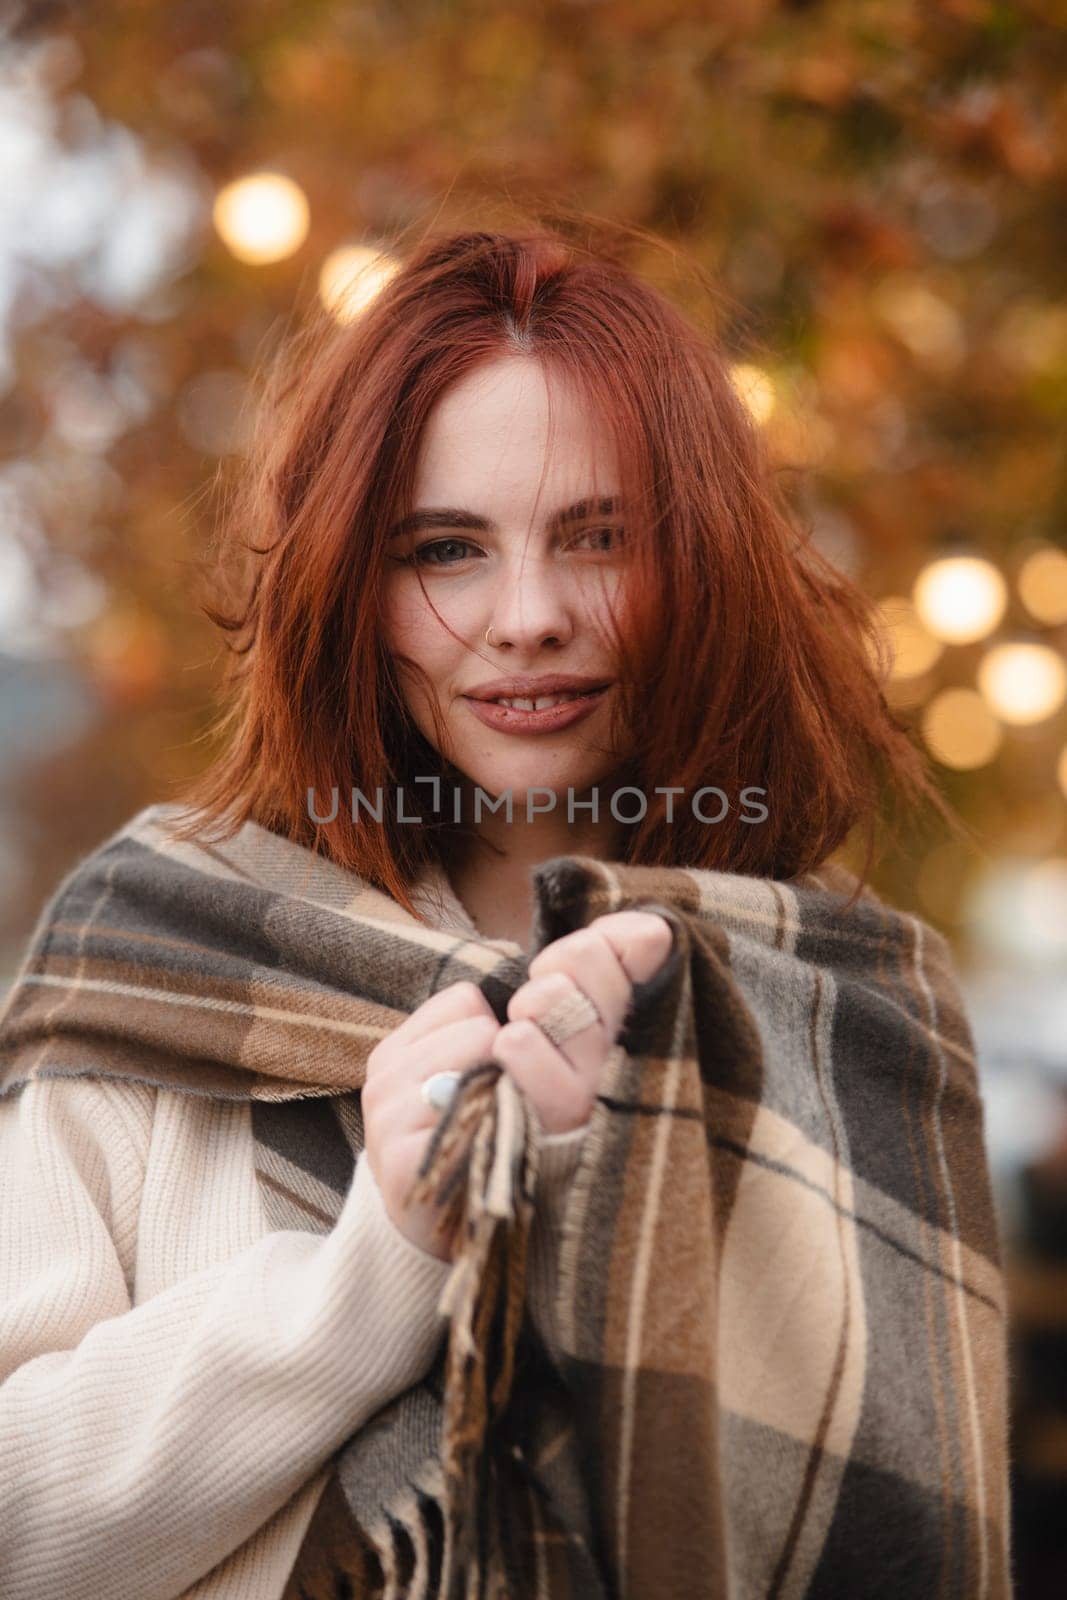 A spirited red-haired girl radiating hippie energy on a cool autumn day. High quality photo